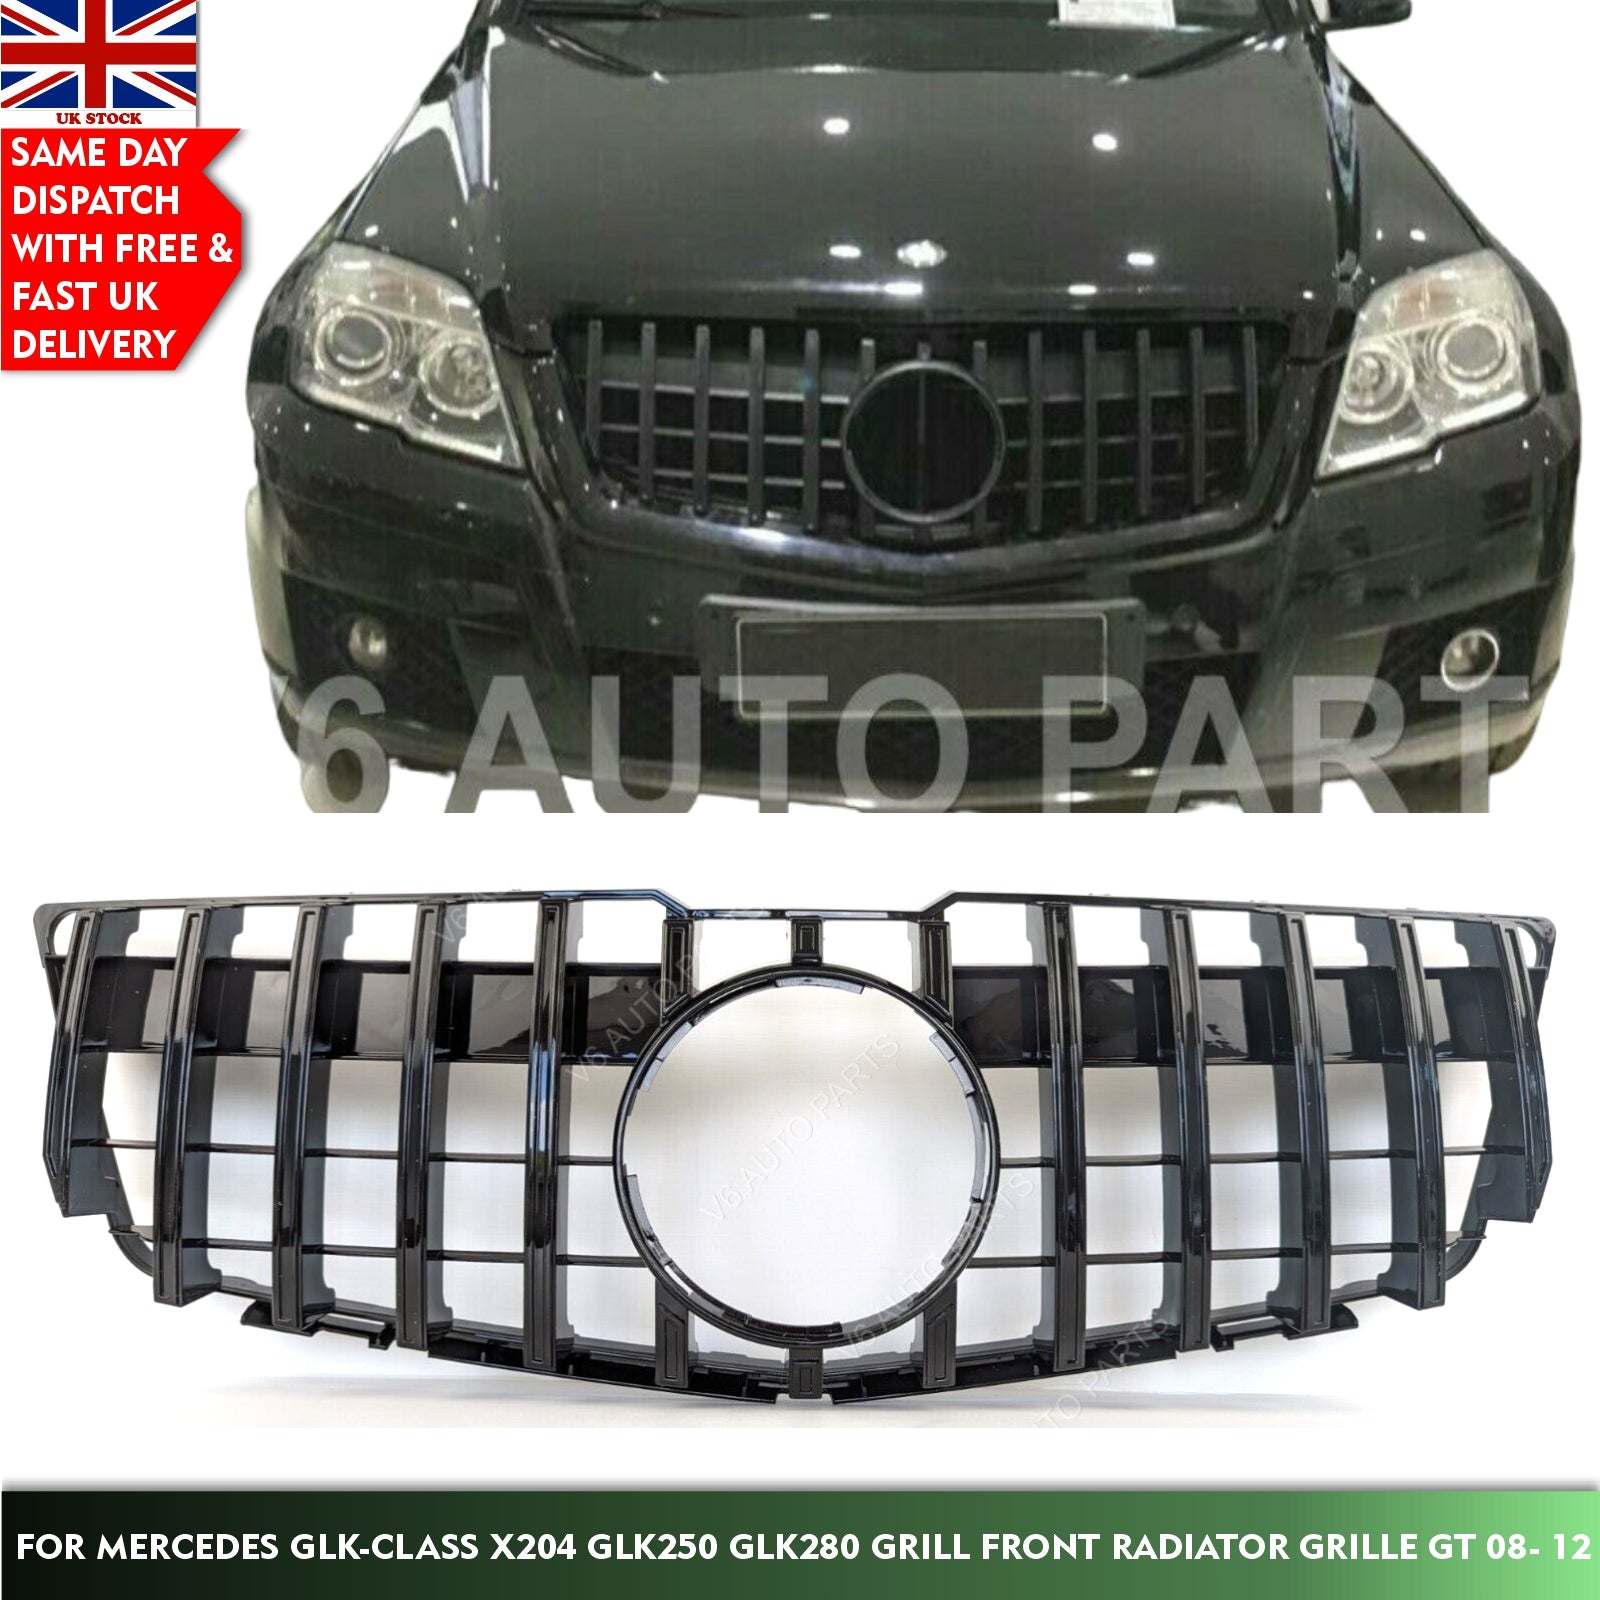 For Mercedes GLK-Class X204 GLK250 Front Radiator Panamericana Grille 2008-2012